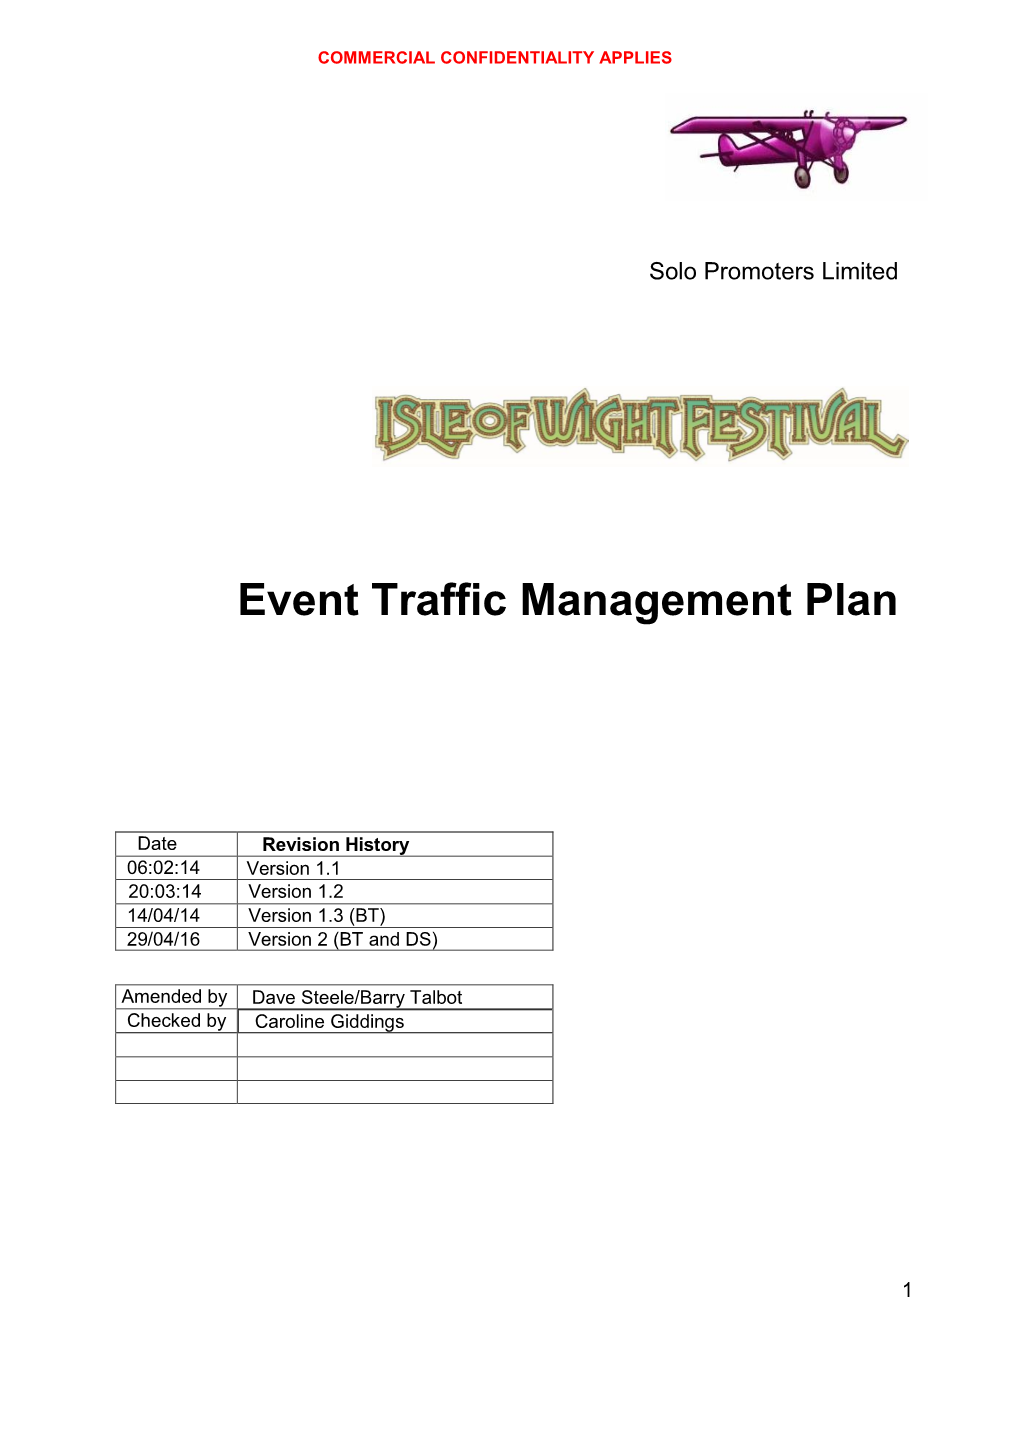 Isle of Wight Festival Traffic Management